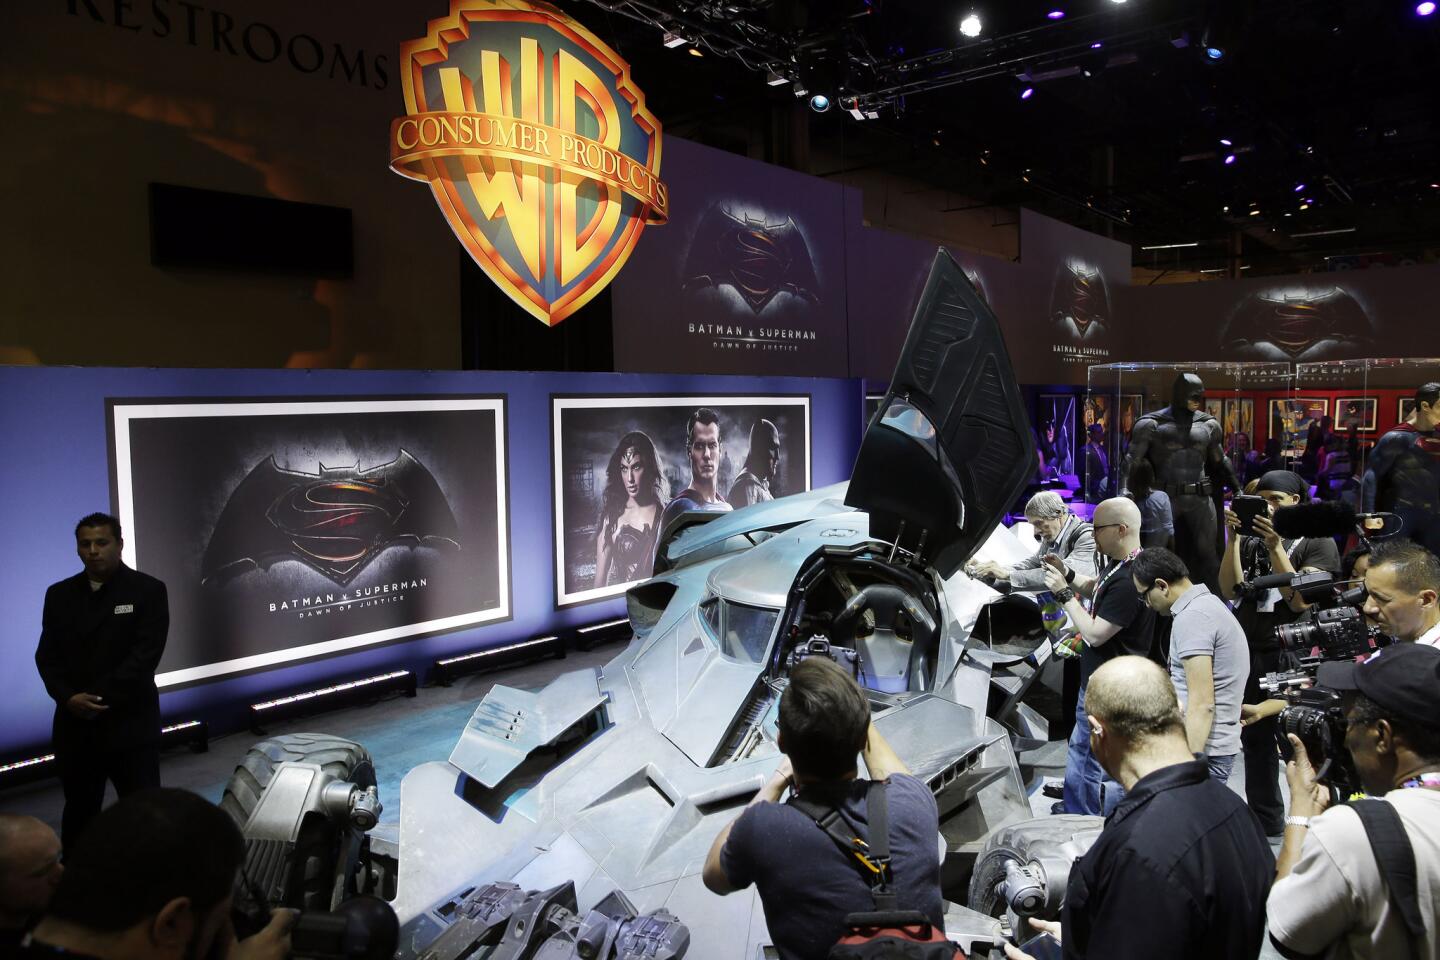 Warner Bros. Consumer Products unveils an exclusive look at the Batmobile and select costumes from the film “Batman v Superman: Dawn of Justice” at Licensing Expo 2015.